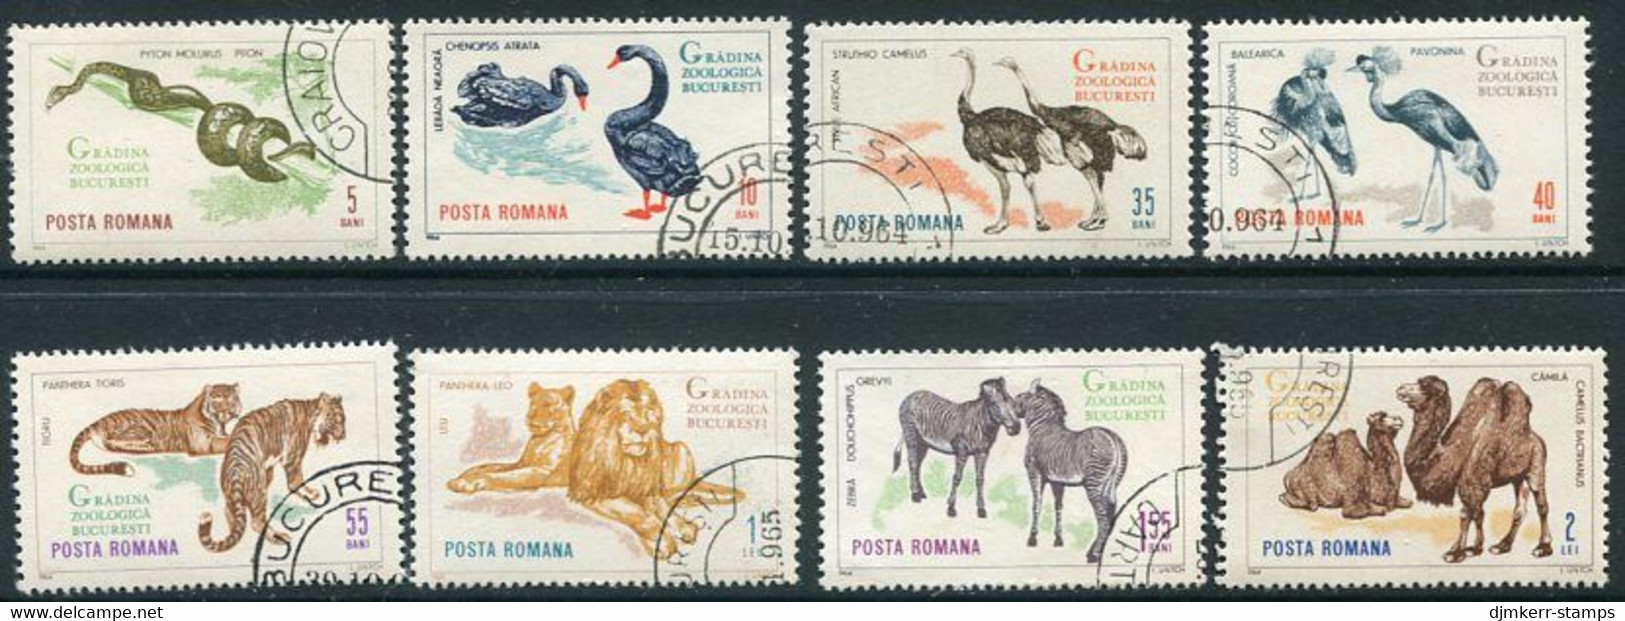 ROMANIA 1964 Bucharest Zoo Used.  Michel 2330-37 - Used Stamps